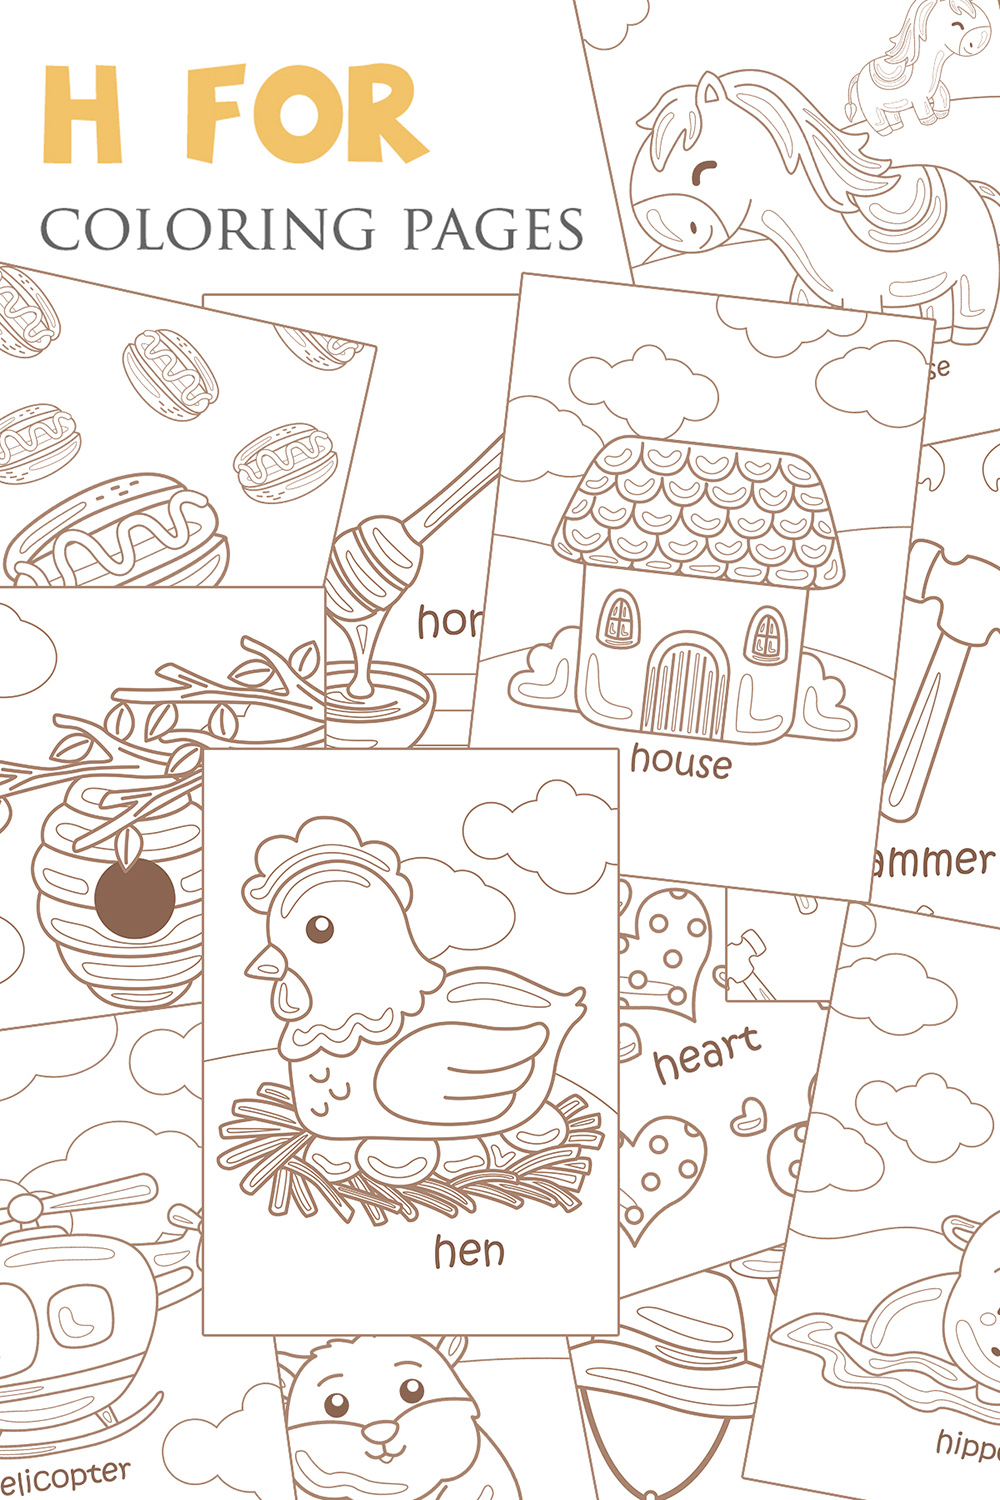 Alphabet H For Vocabulary School Letter Reading Writing Font Study Learning Student Toodler Kids Hive Hamster Heart Honey Horse House Hat Hotdog Hippo Helicopter Hen Cartoon Coloring Pages for Kids and Adult pinterest preview image.